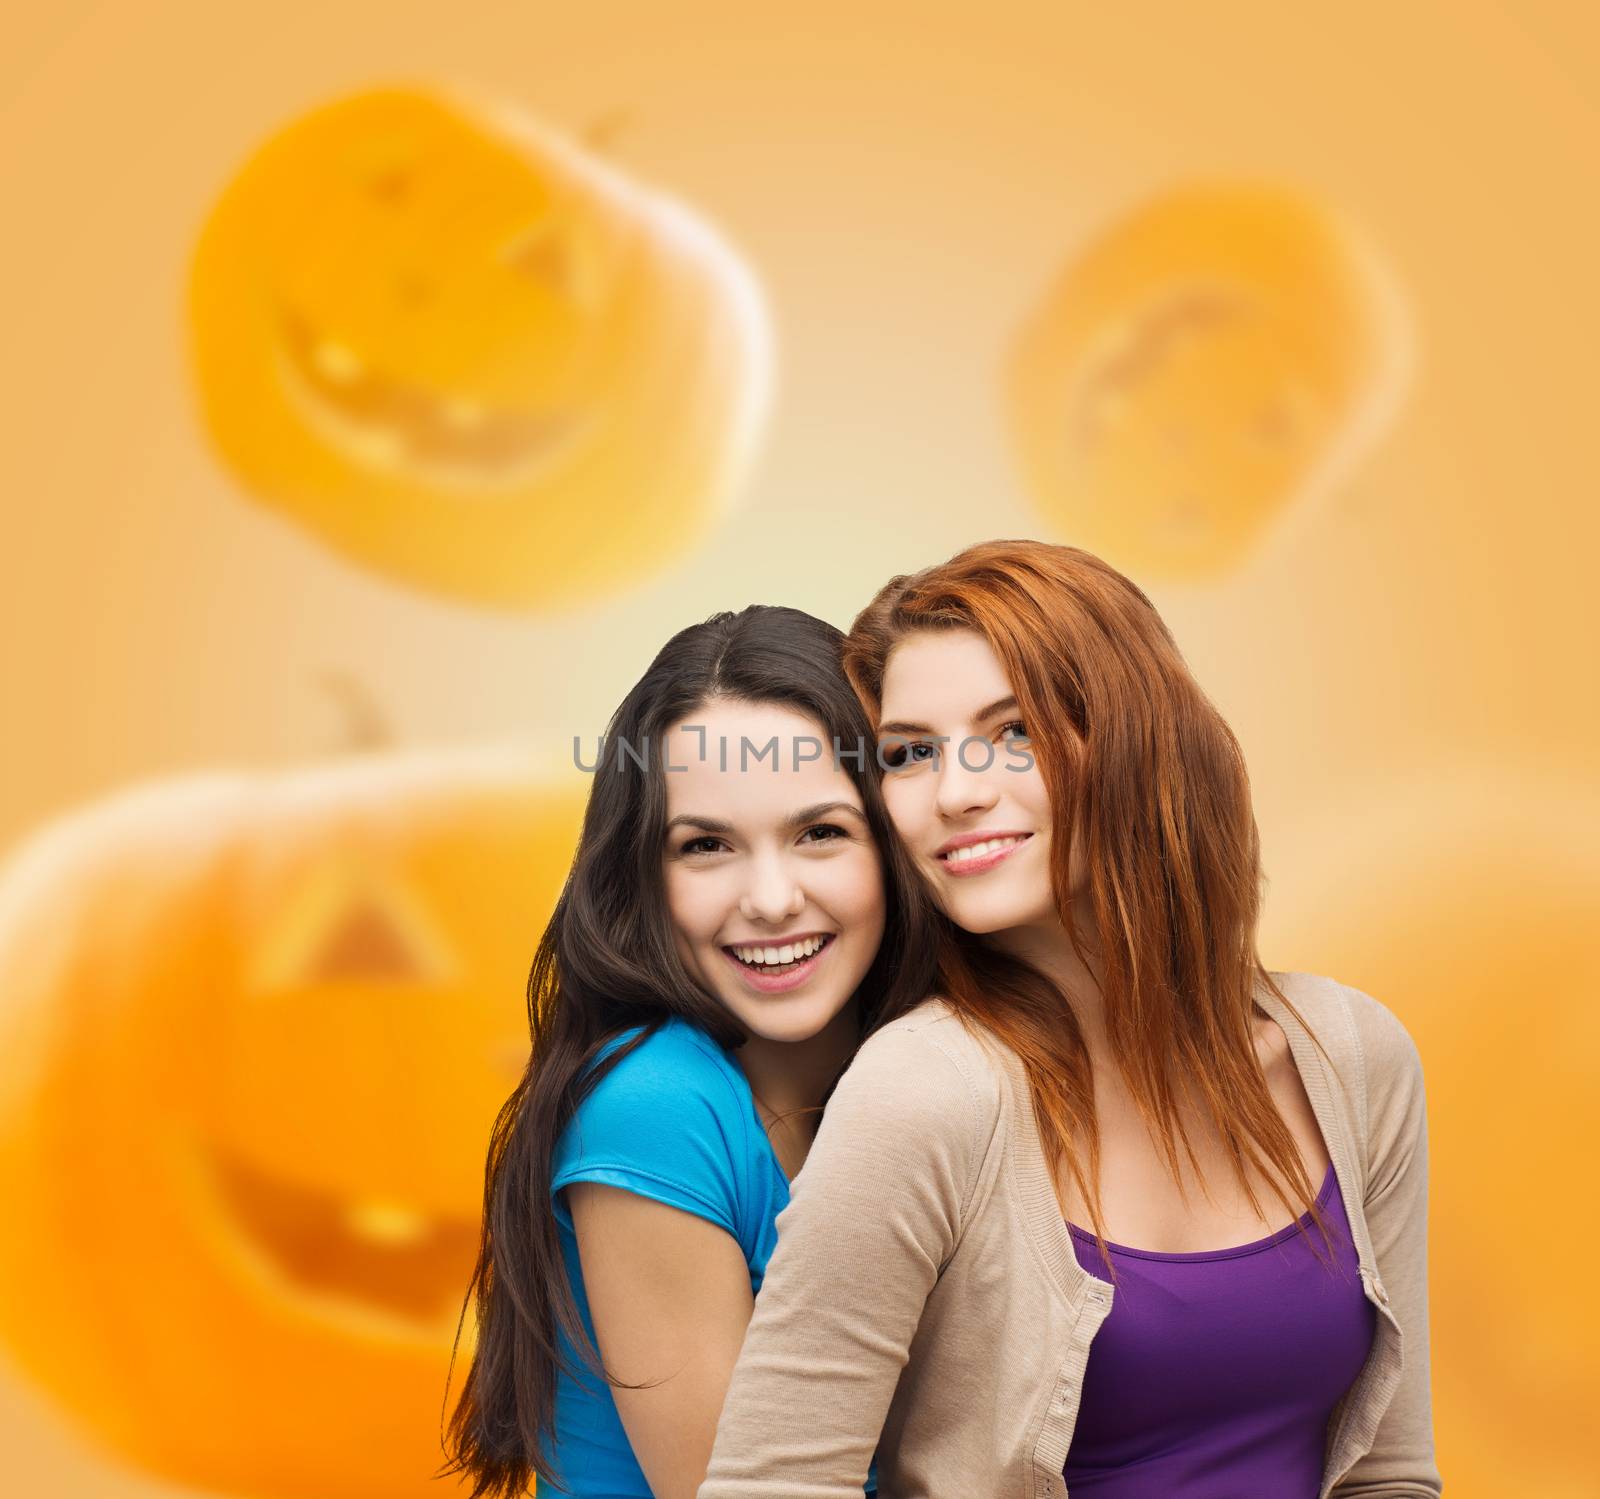 happiness, holidays, friendship and people concept - smiling teenage girls hugging over halloween pumpkins background